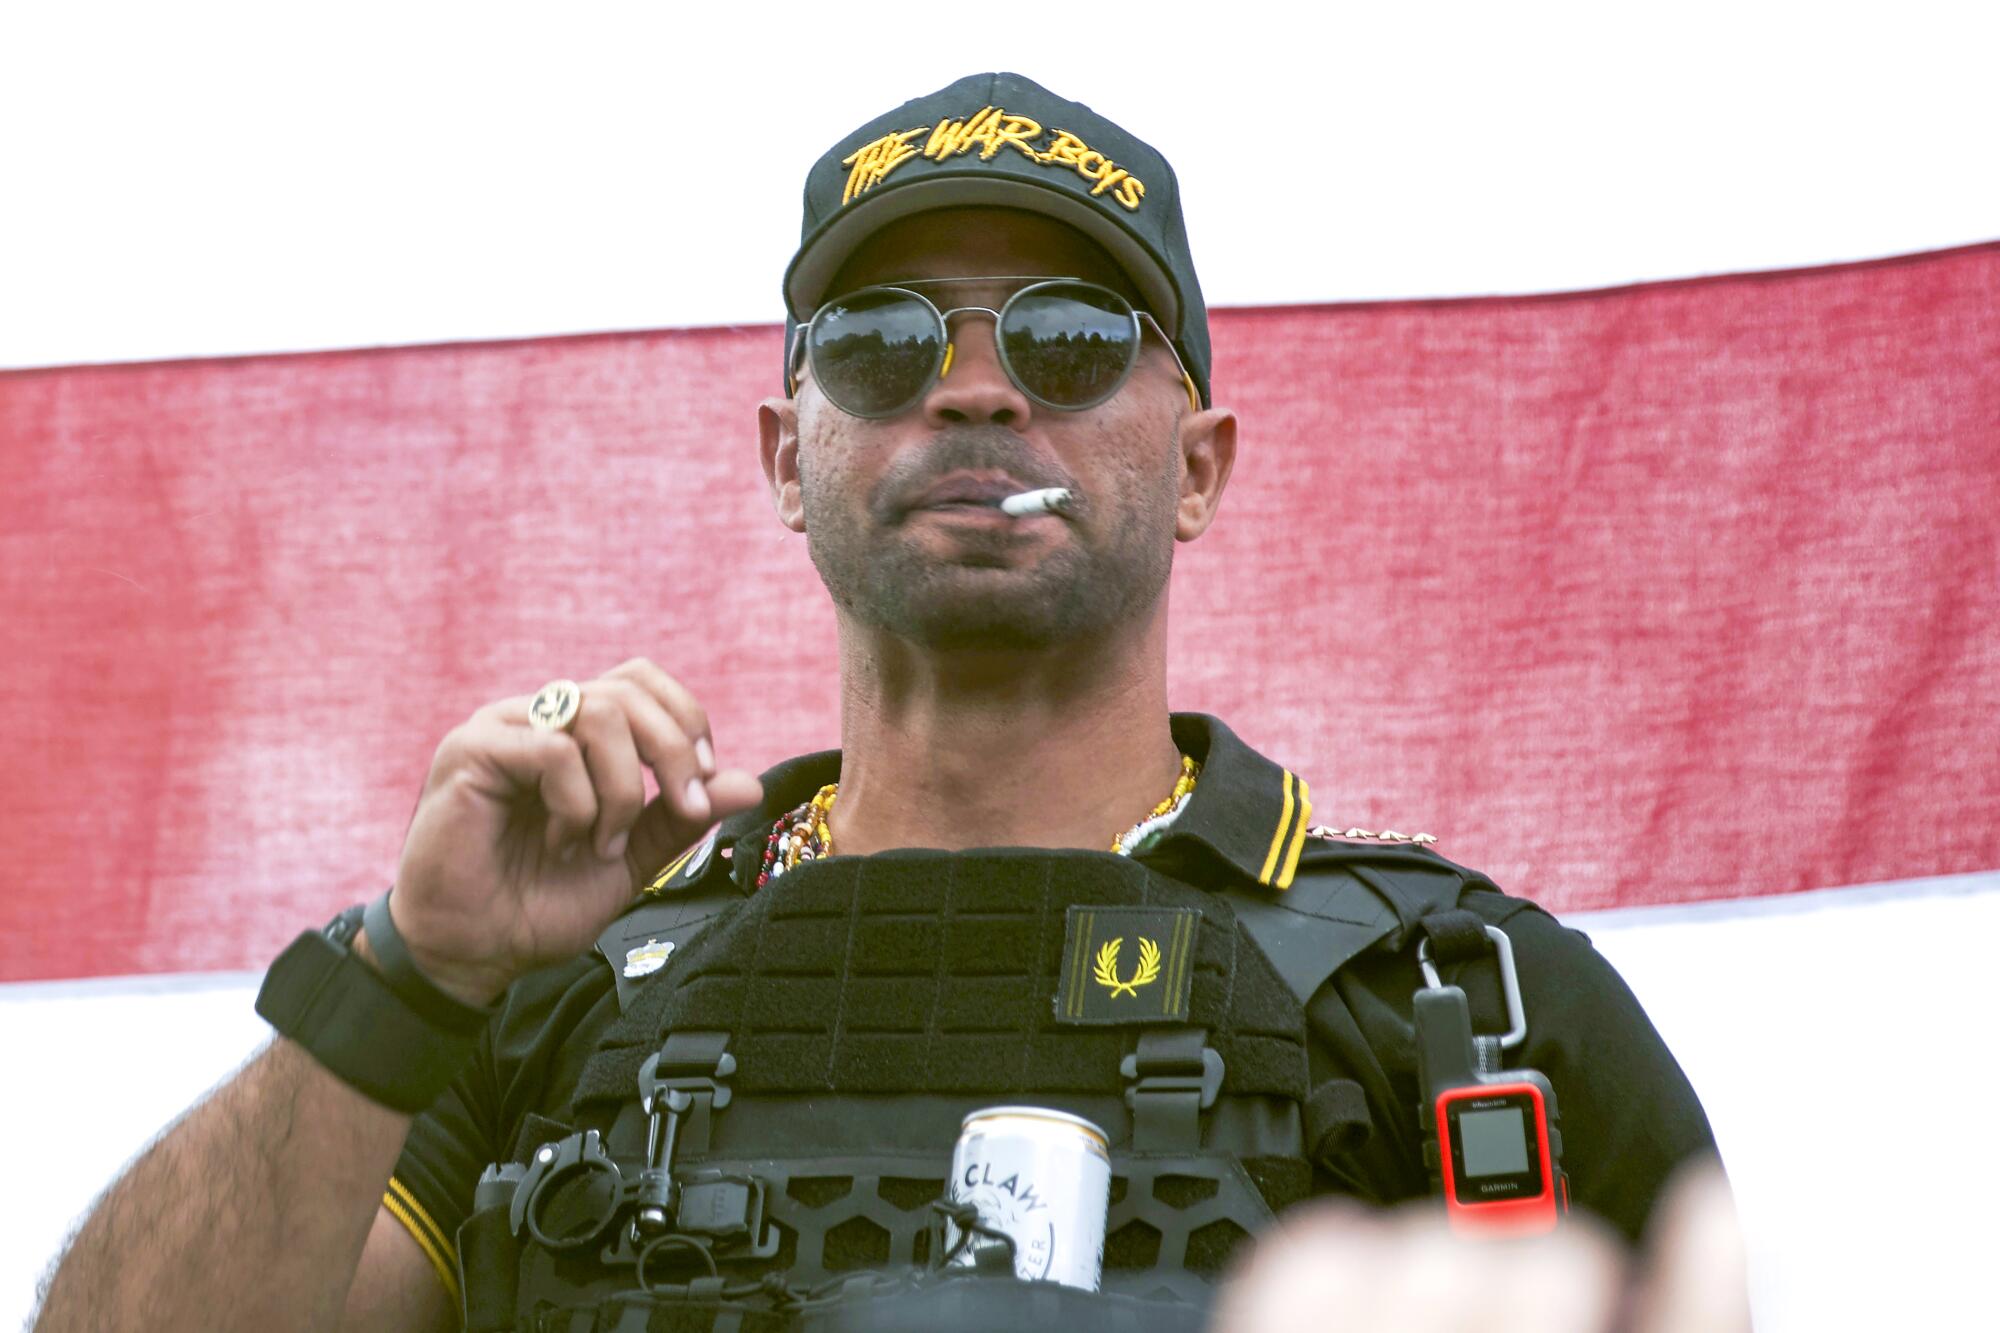 Former extremist leader Henry "Enrique" Tarrio smokes while wearing a tactical vest and a cap that says "The war boys"